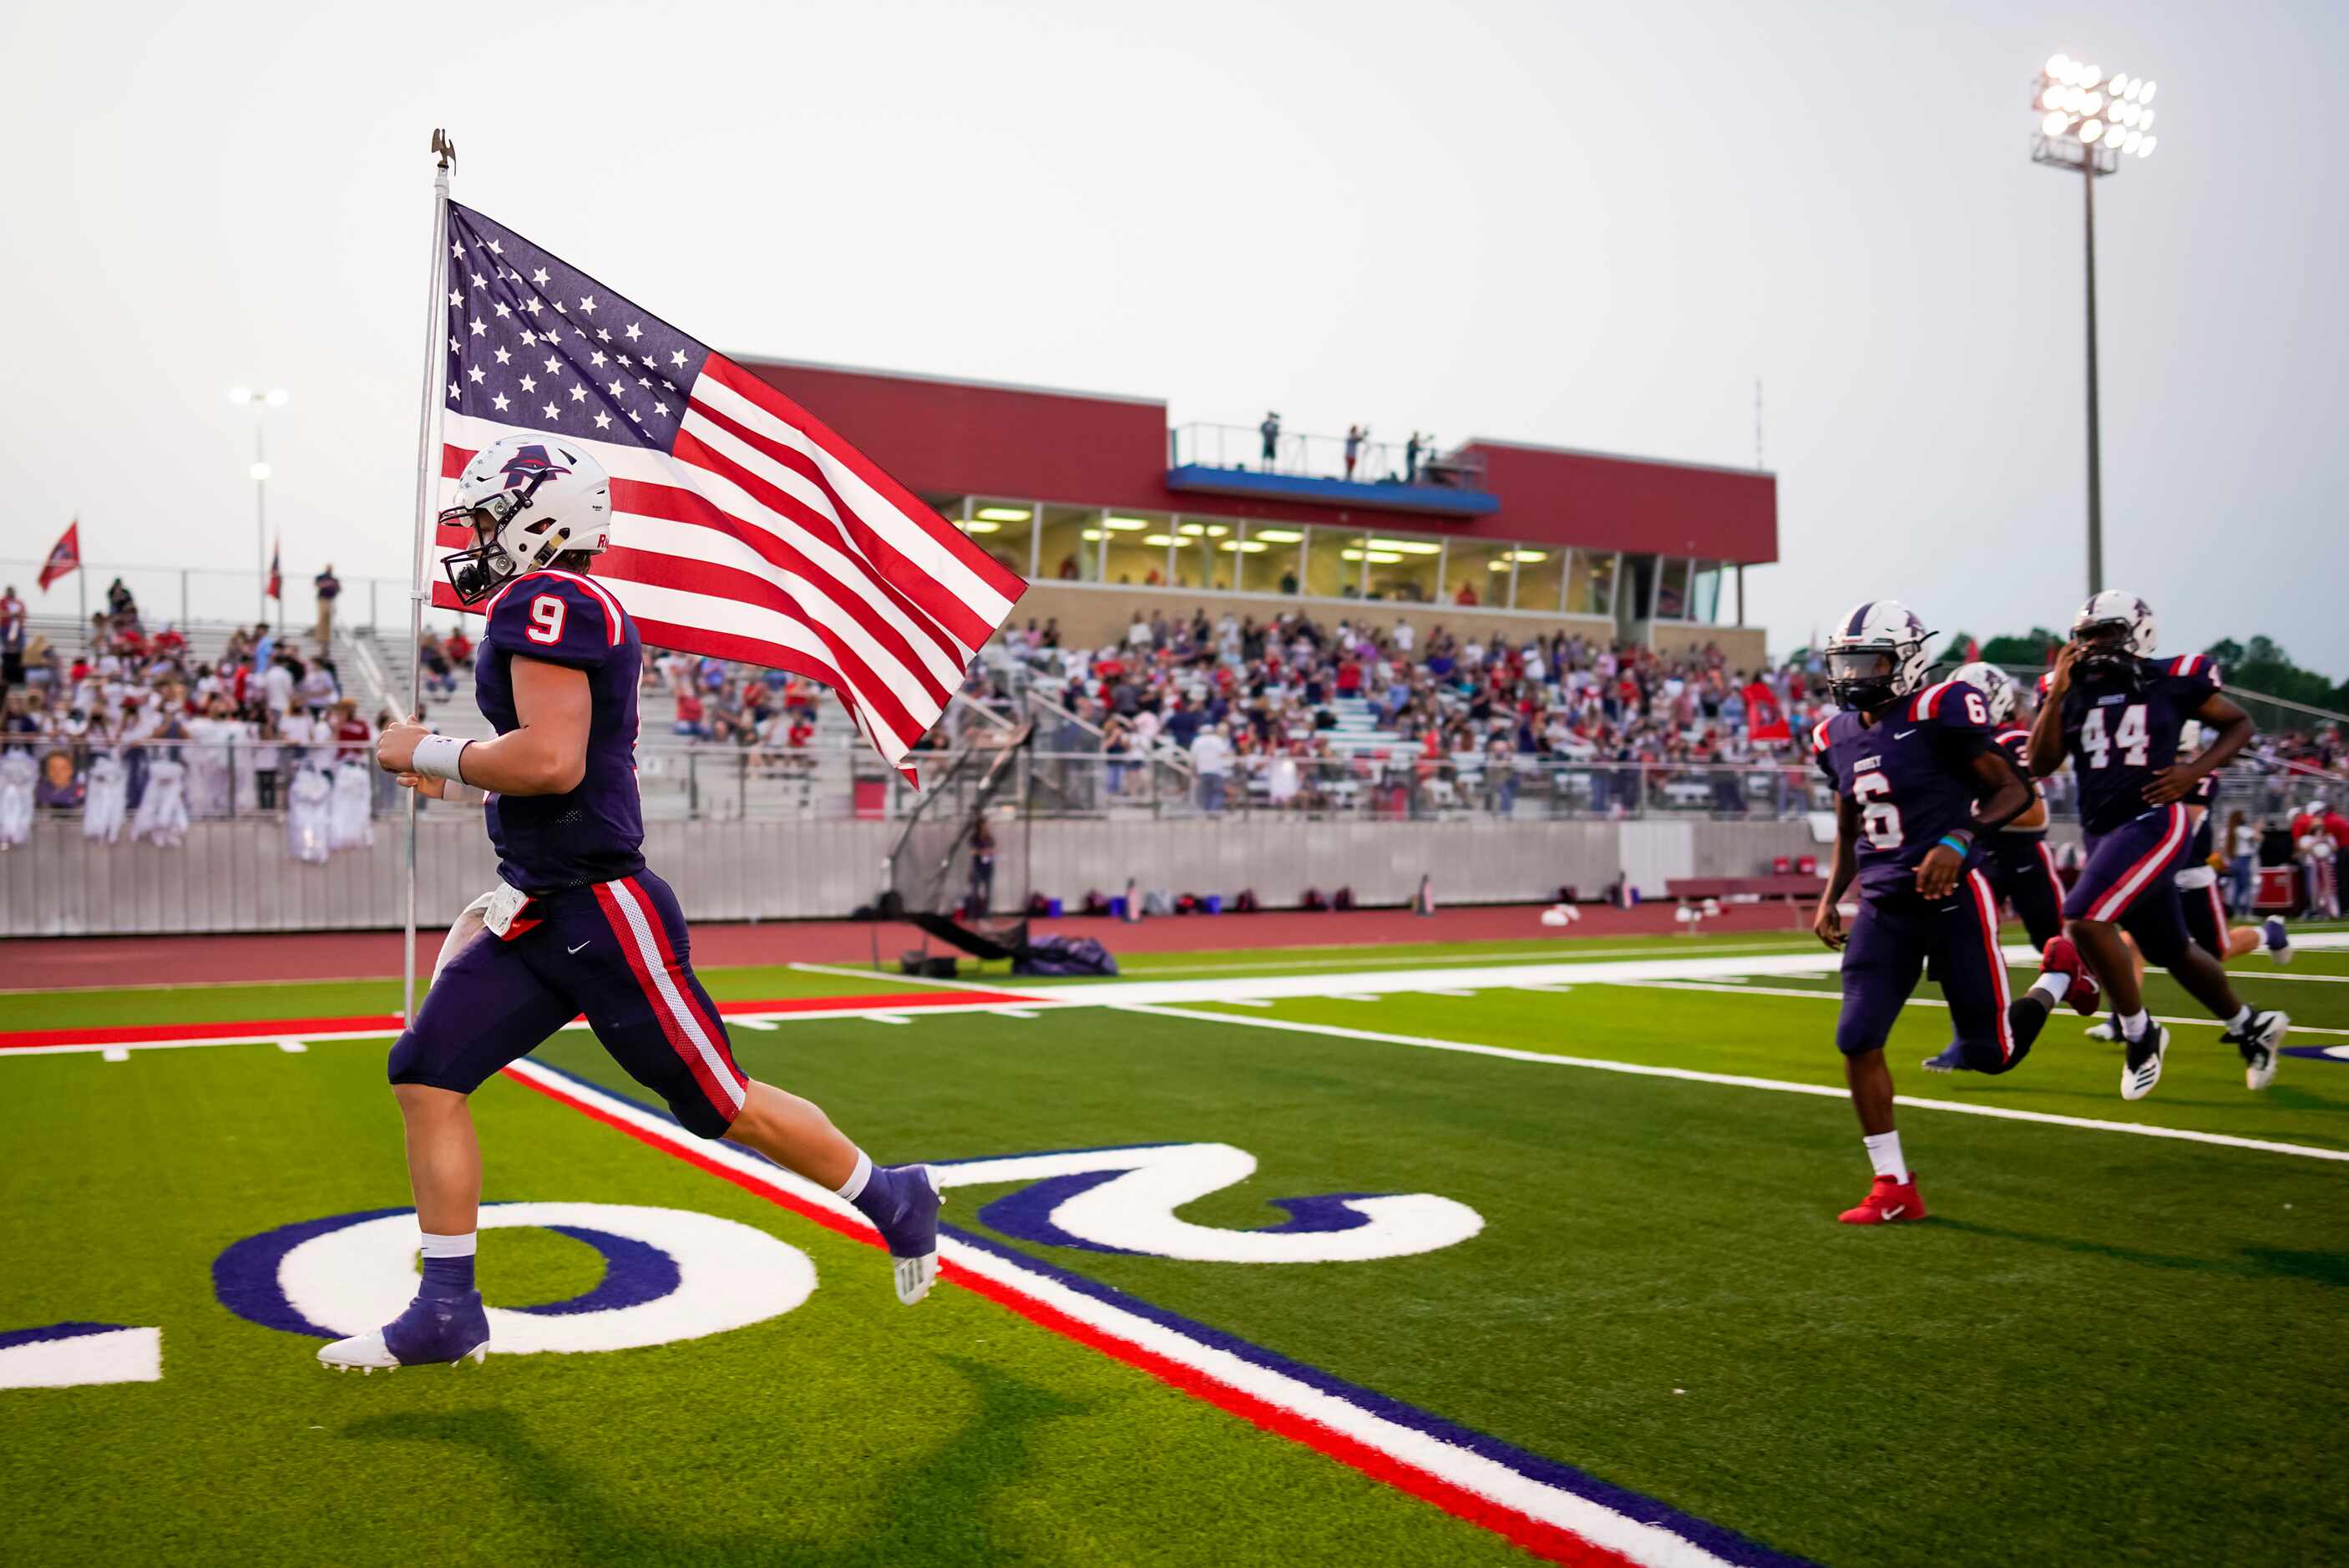 Aubrey quarterback Jaxon Holder carries the American flag as he leads his teammates onto the...